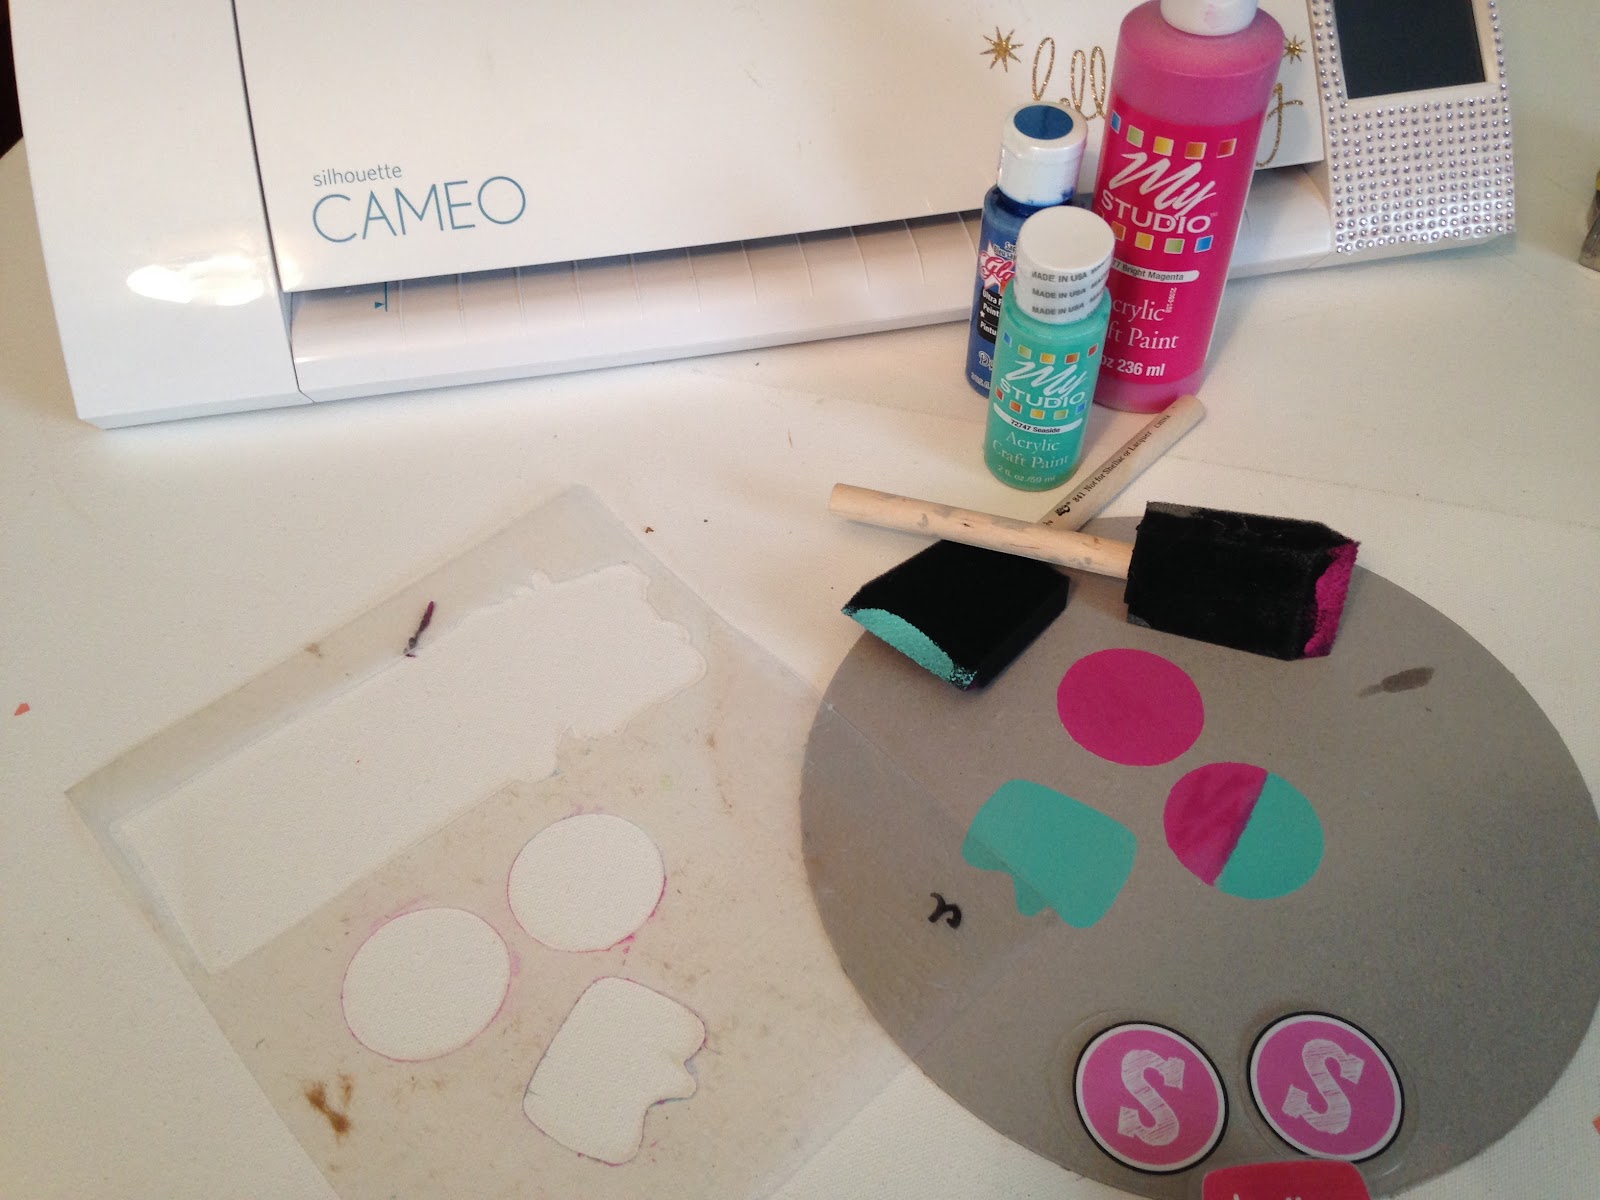 Resticking Silhouette Mat: Cutting Mat Spray Adhesive Review - Silhouette  School